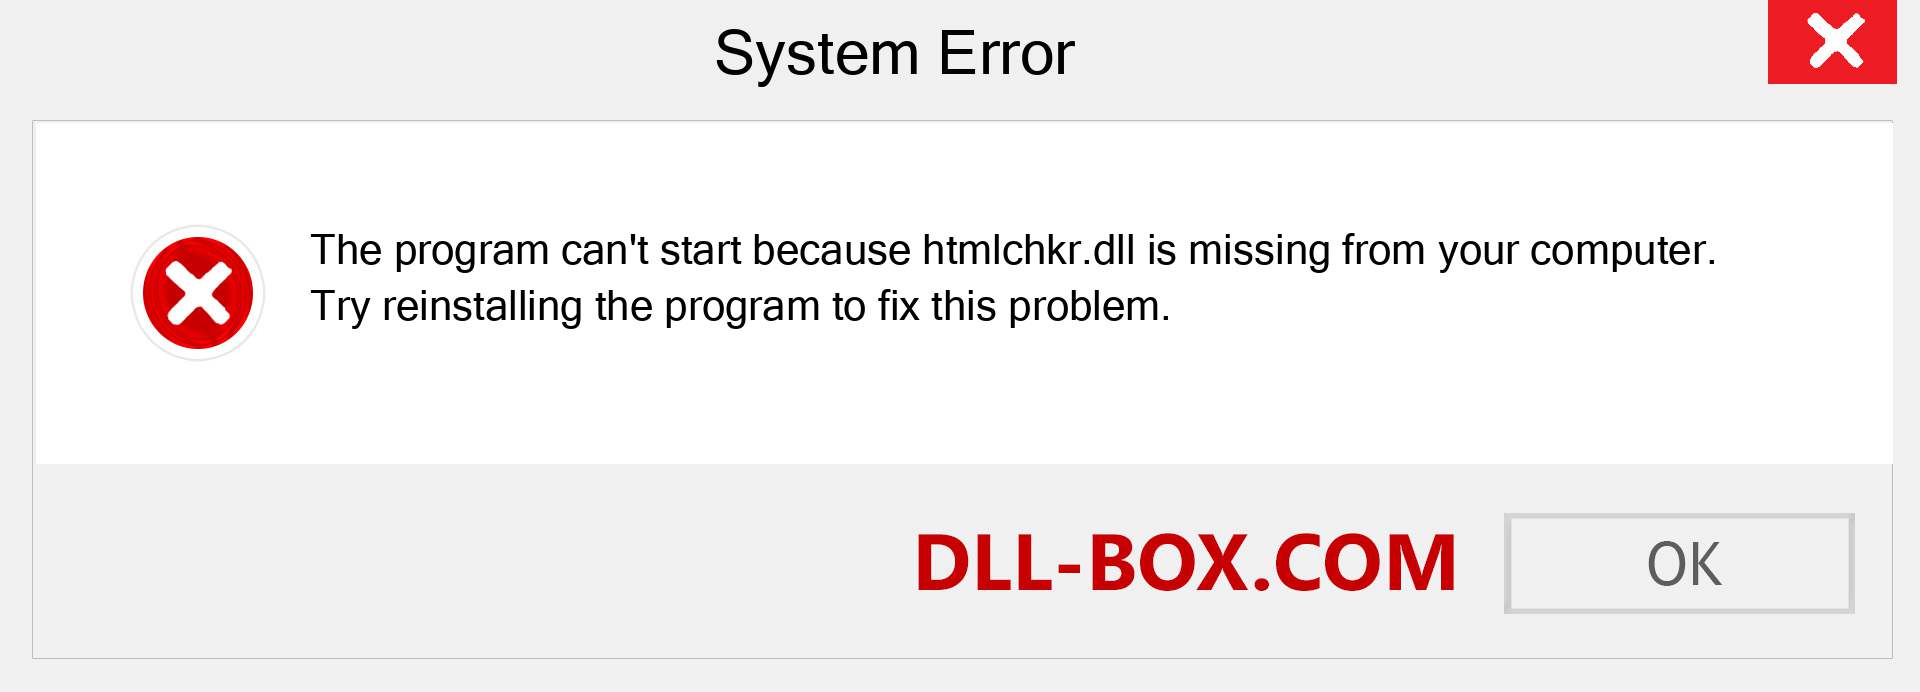  htmlchkr.dll file is missing?. Download for Windows 7, 8, 10 - Fix  htmlchkr dll Missing Error on Windows, photos, images